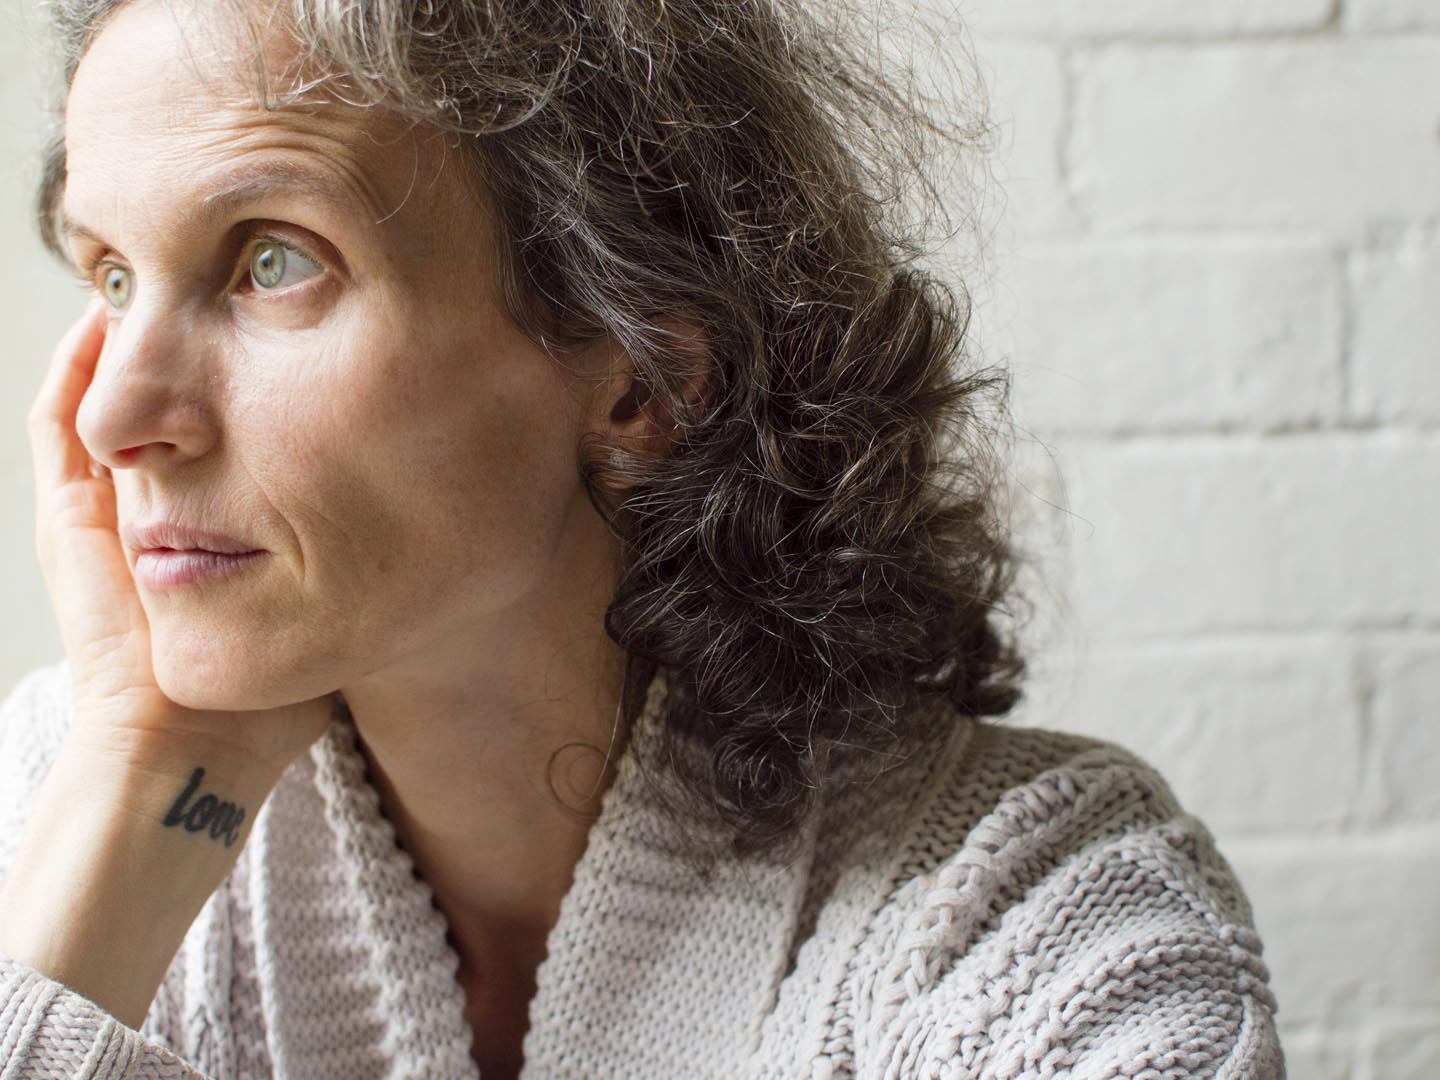 Middle aged woman in grey cardigan with hand on head, looking thoughtful (selective focus)